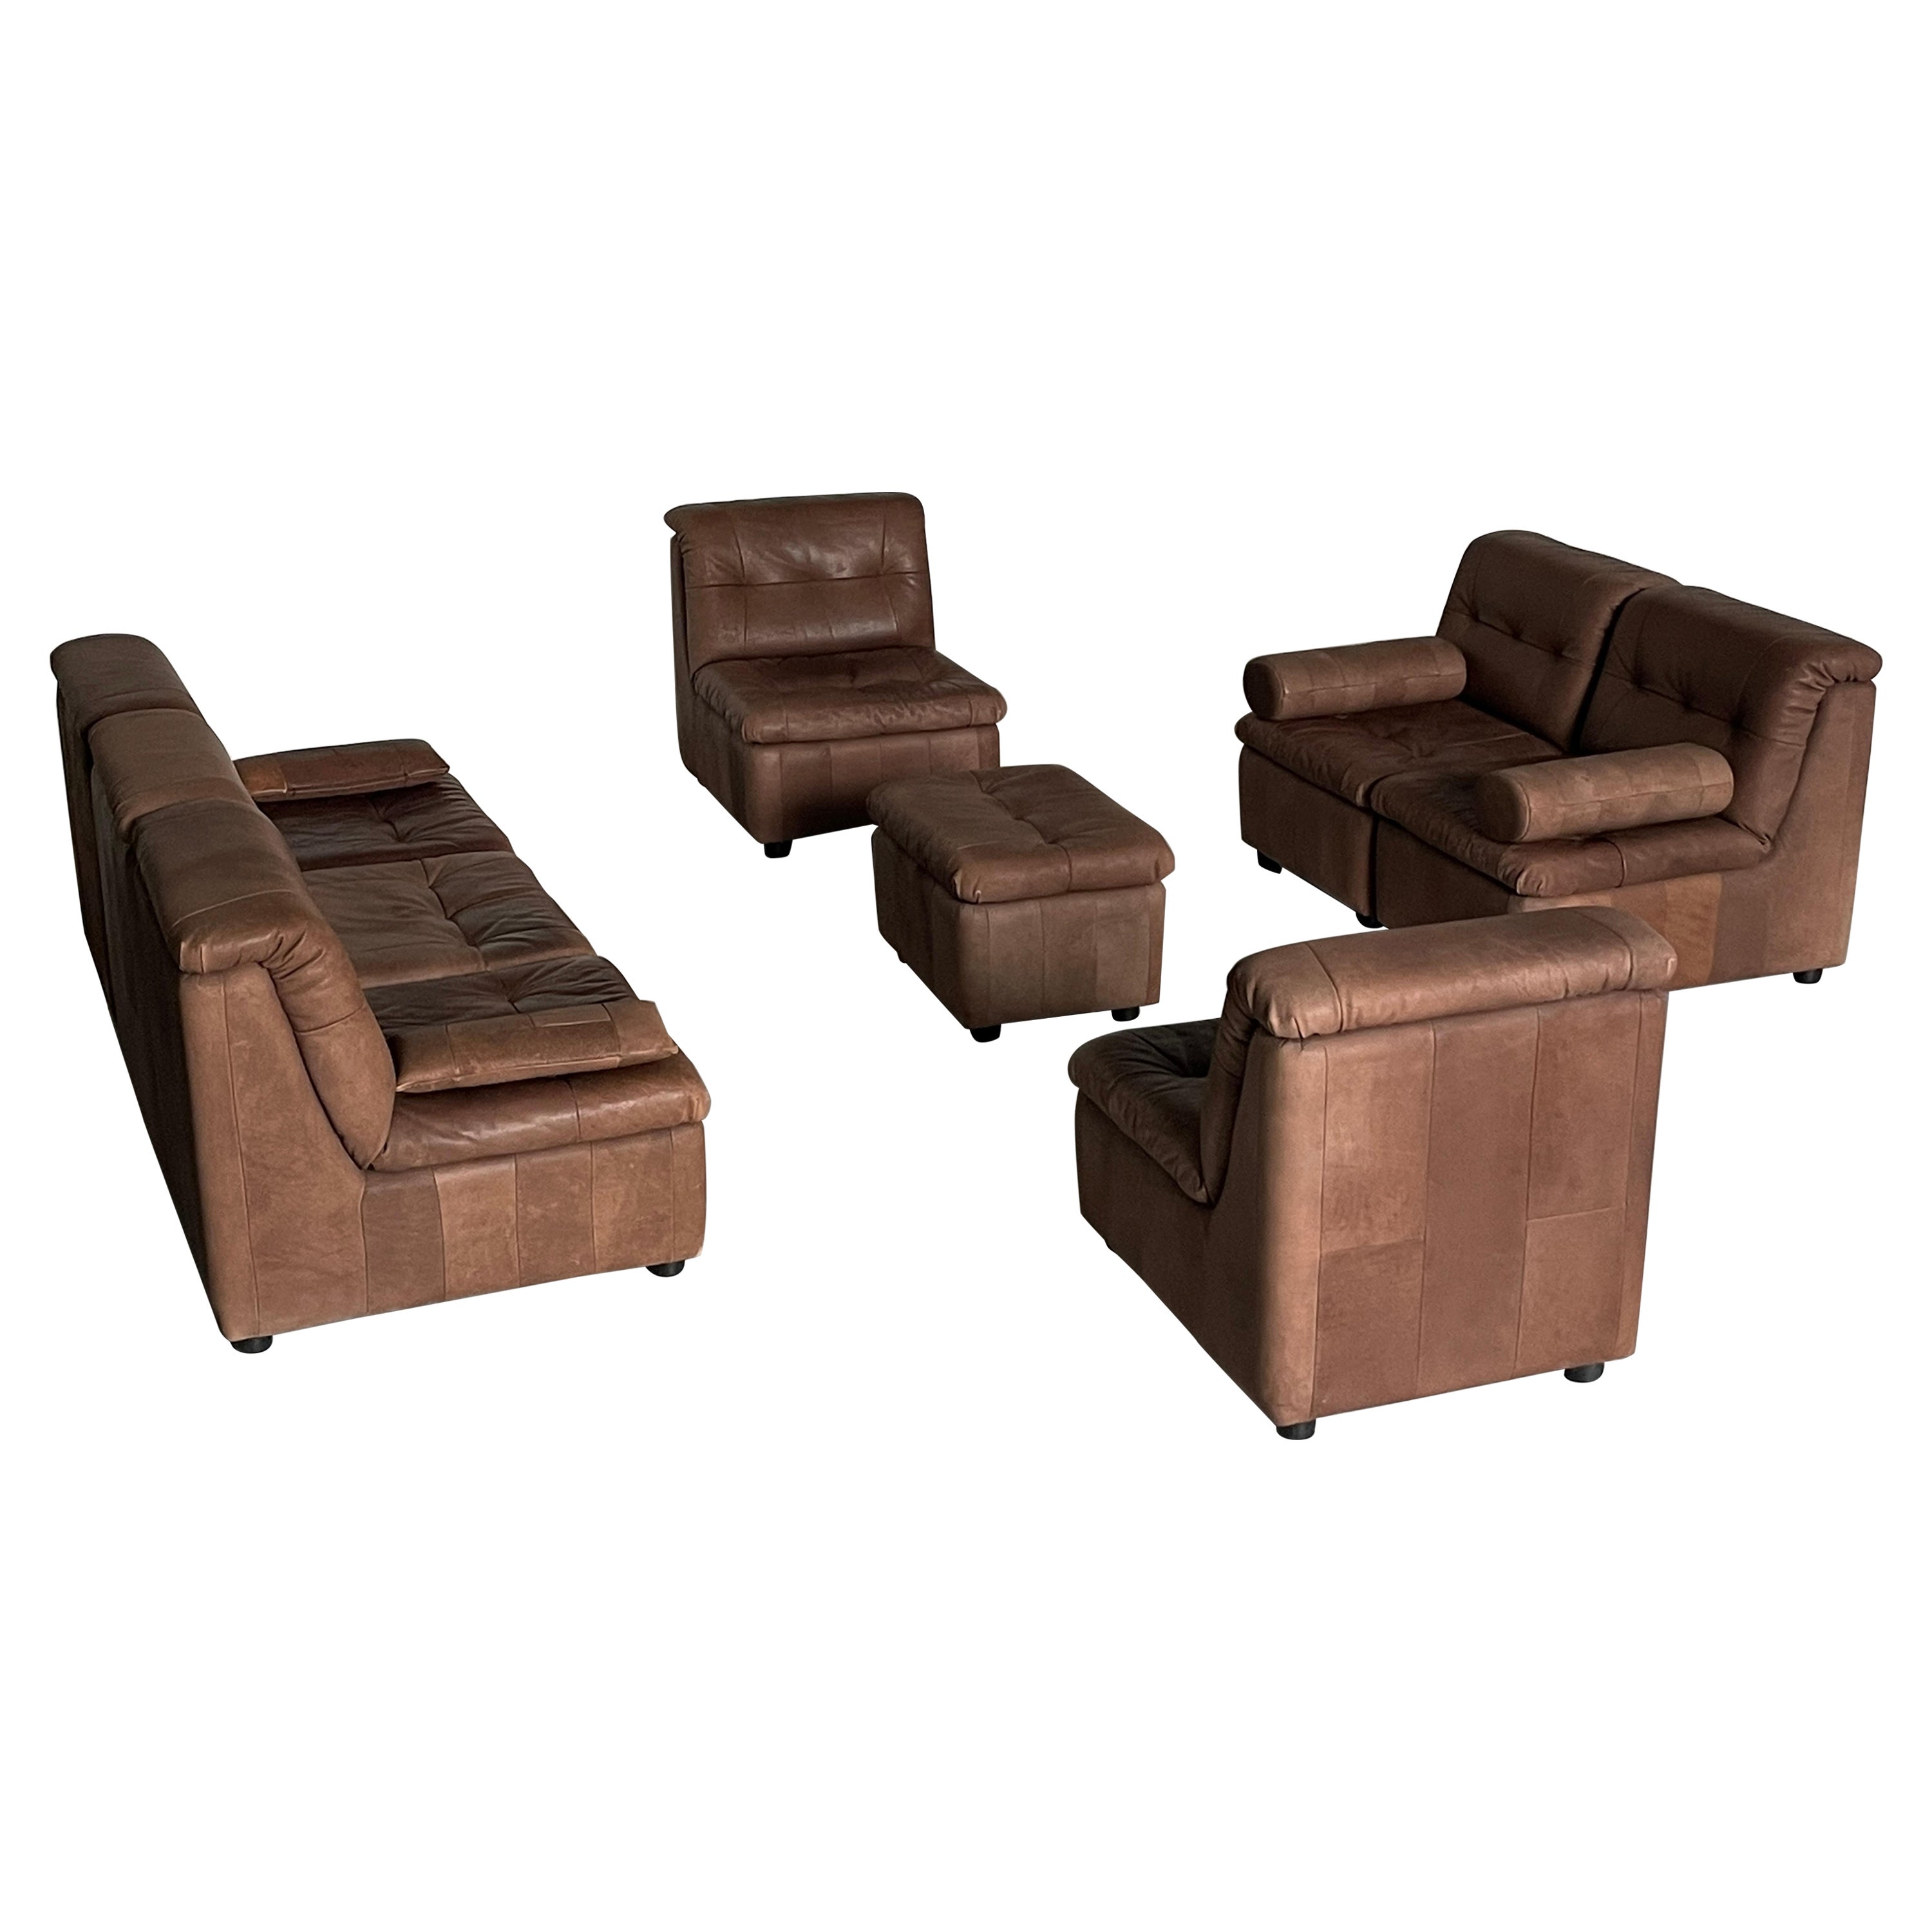 Mid-Century-Modern Patchwork Leather Modular Seating Set in the style of De Sede